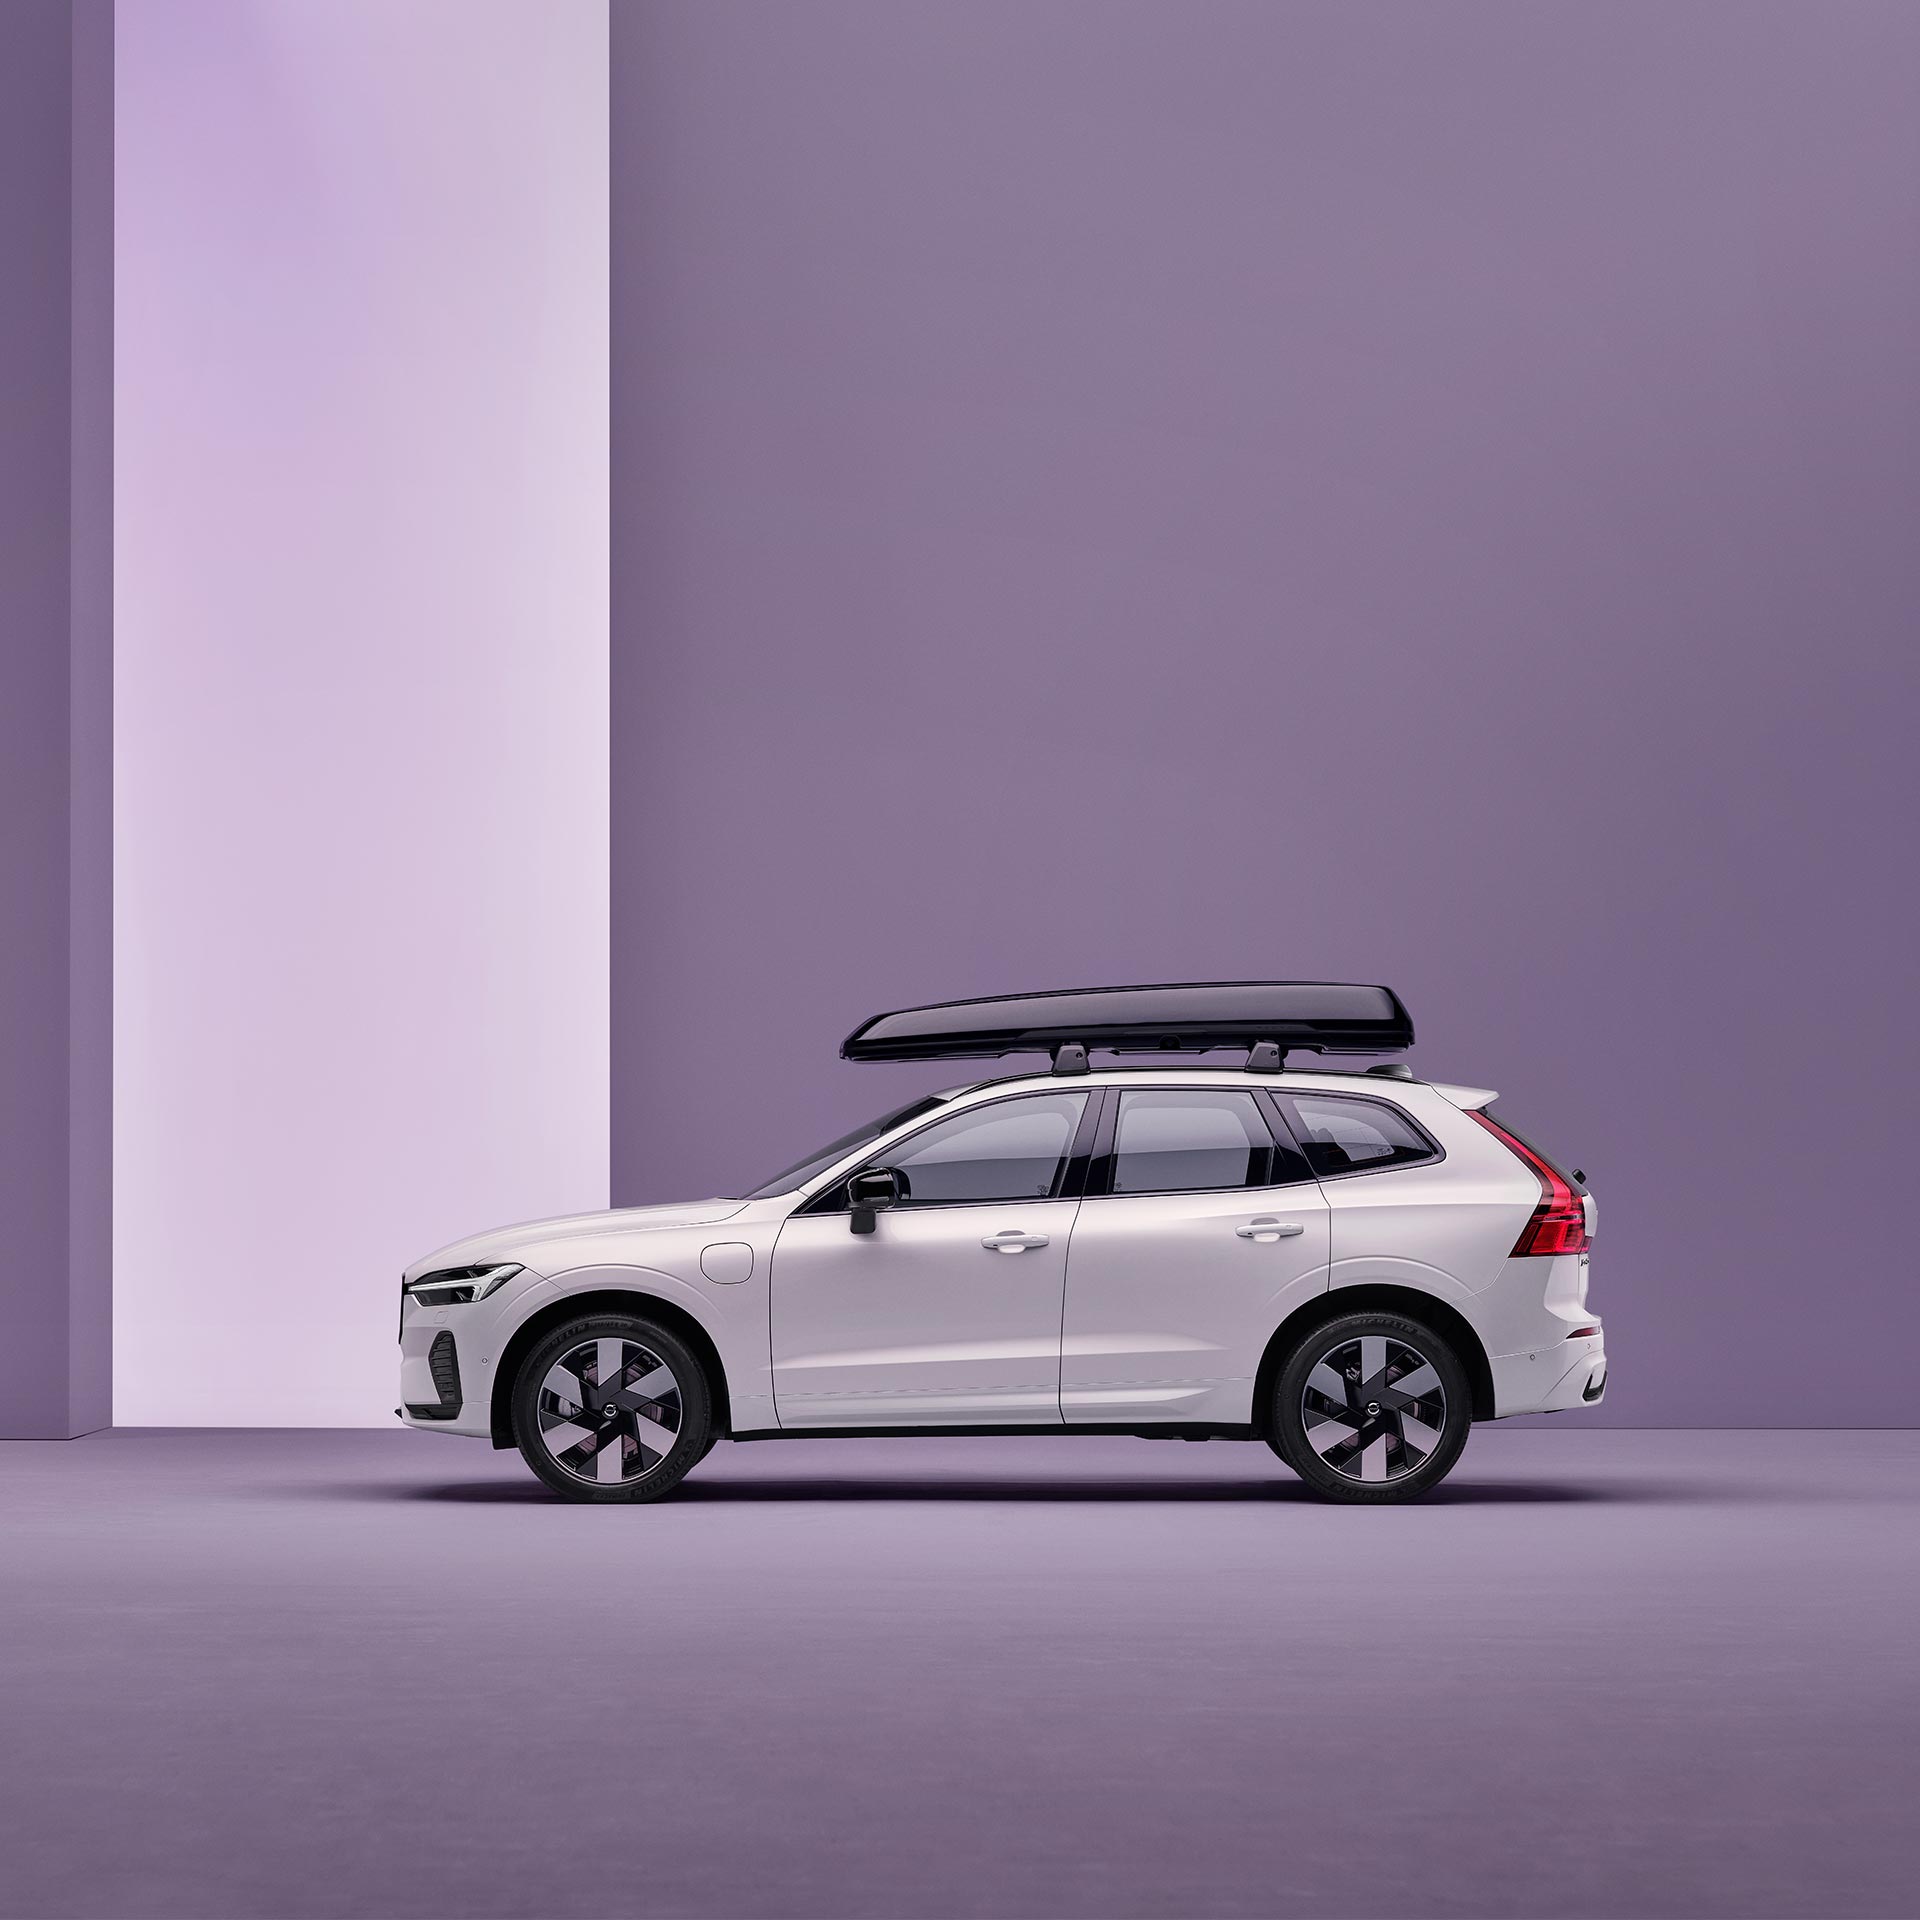 Side view of a Volvo XC60 plug-in hybrid with a roof box.